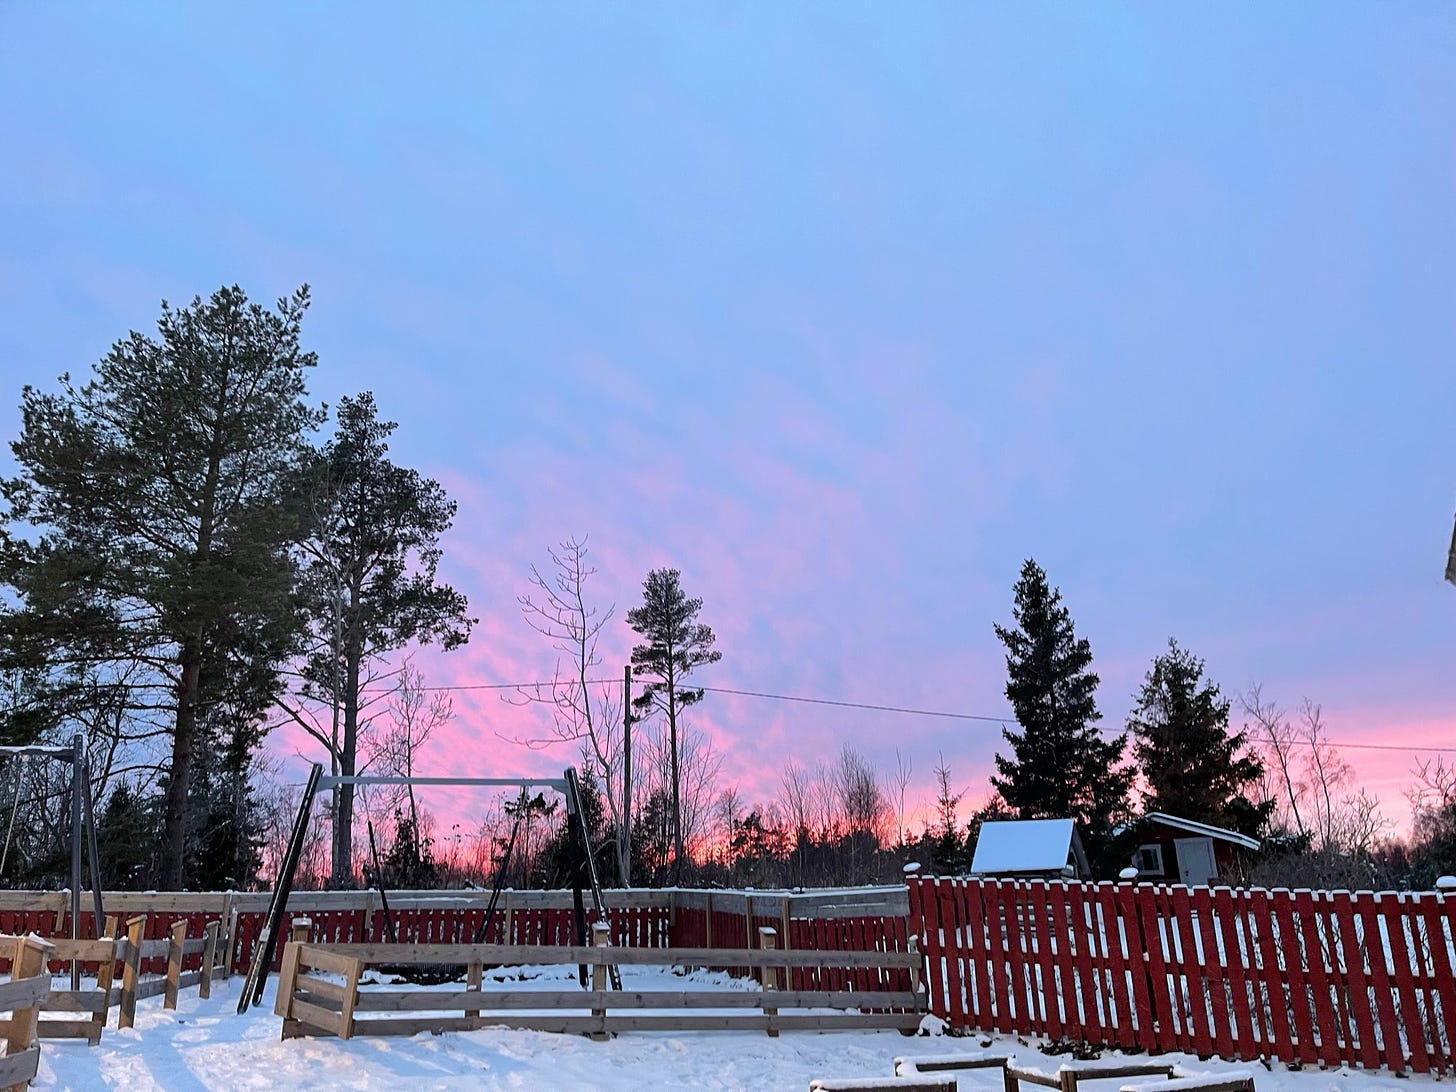 Snow covered swing set and playground with some pine trees behind it and a pink horizon as the sun sets behind the mottled cloudy sky